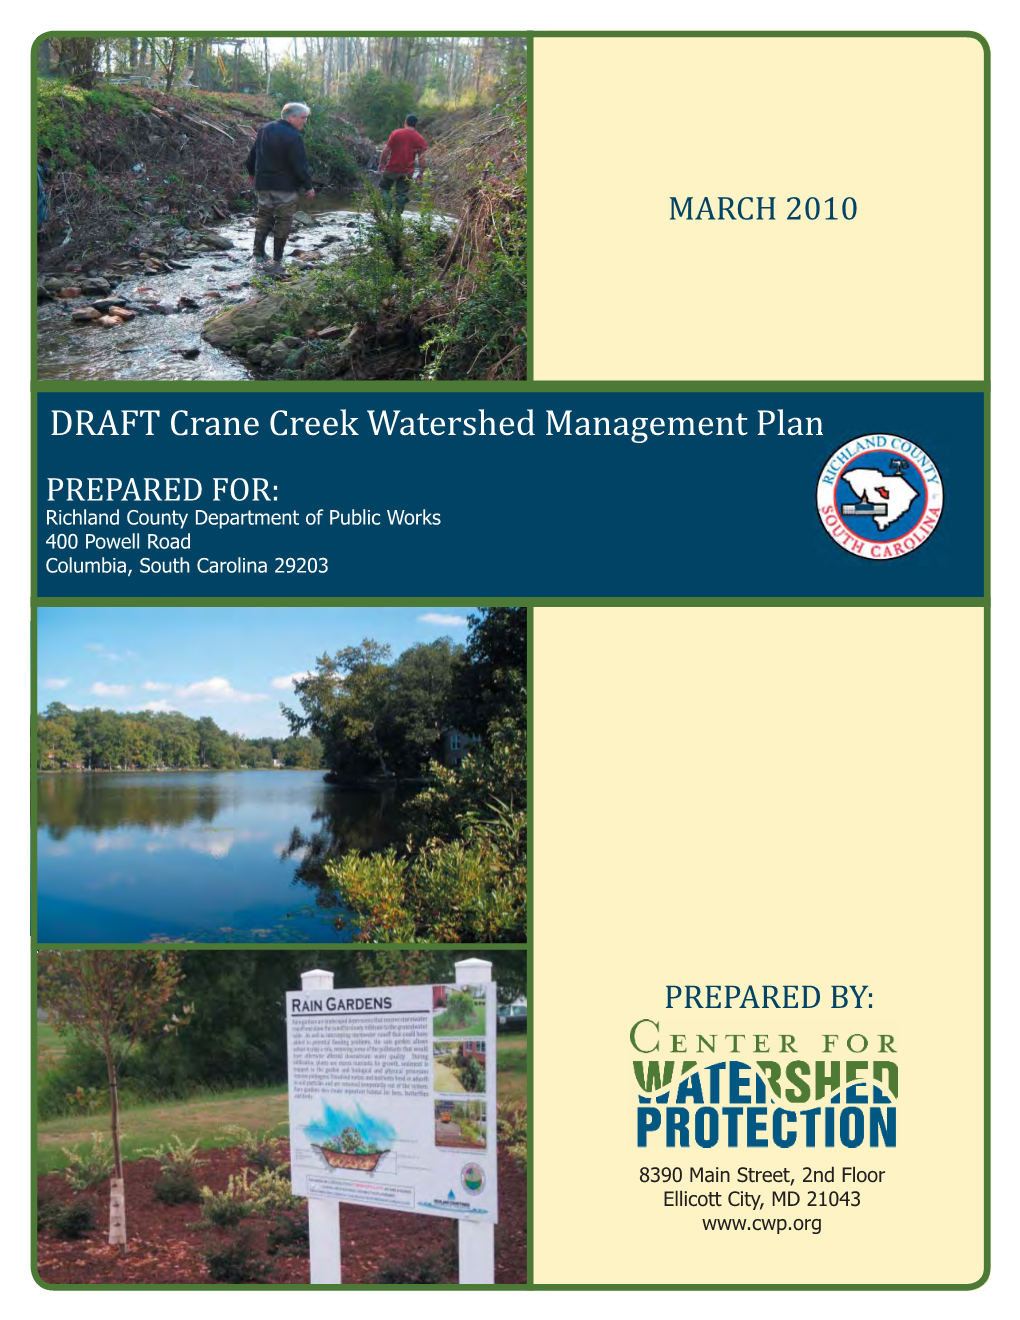 DRAFT Crane Creek Watershed Management Plan PREPARED FOR: Richland County Department of Public Works 400 Powell Road Columbia, South Carolina 29203